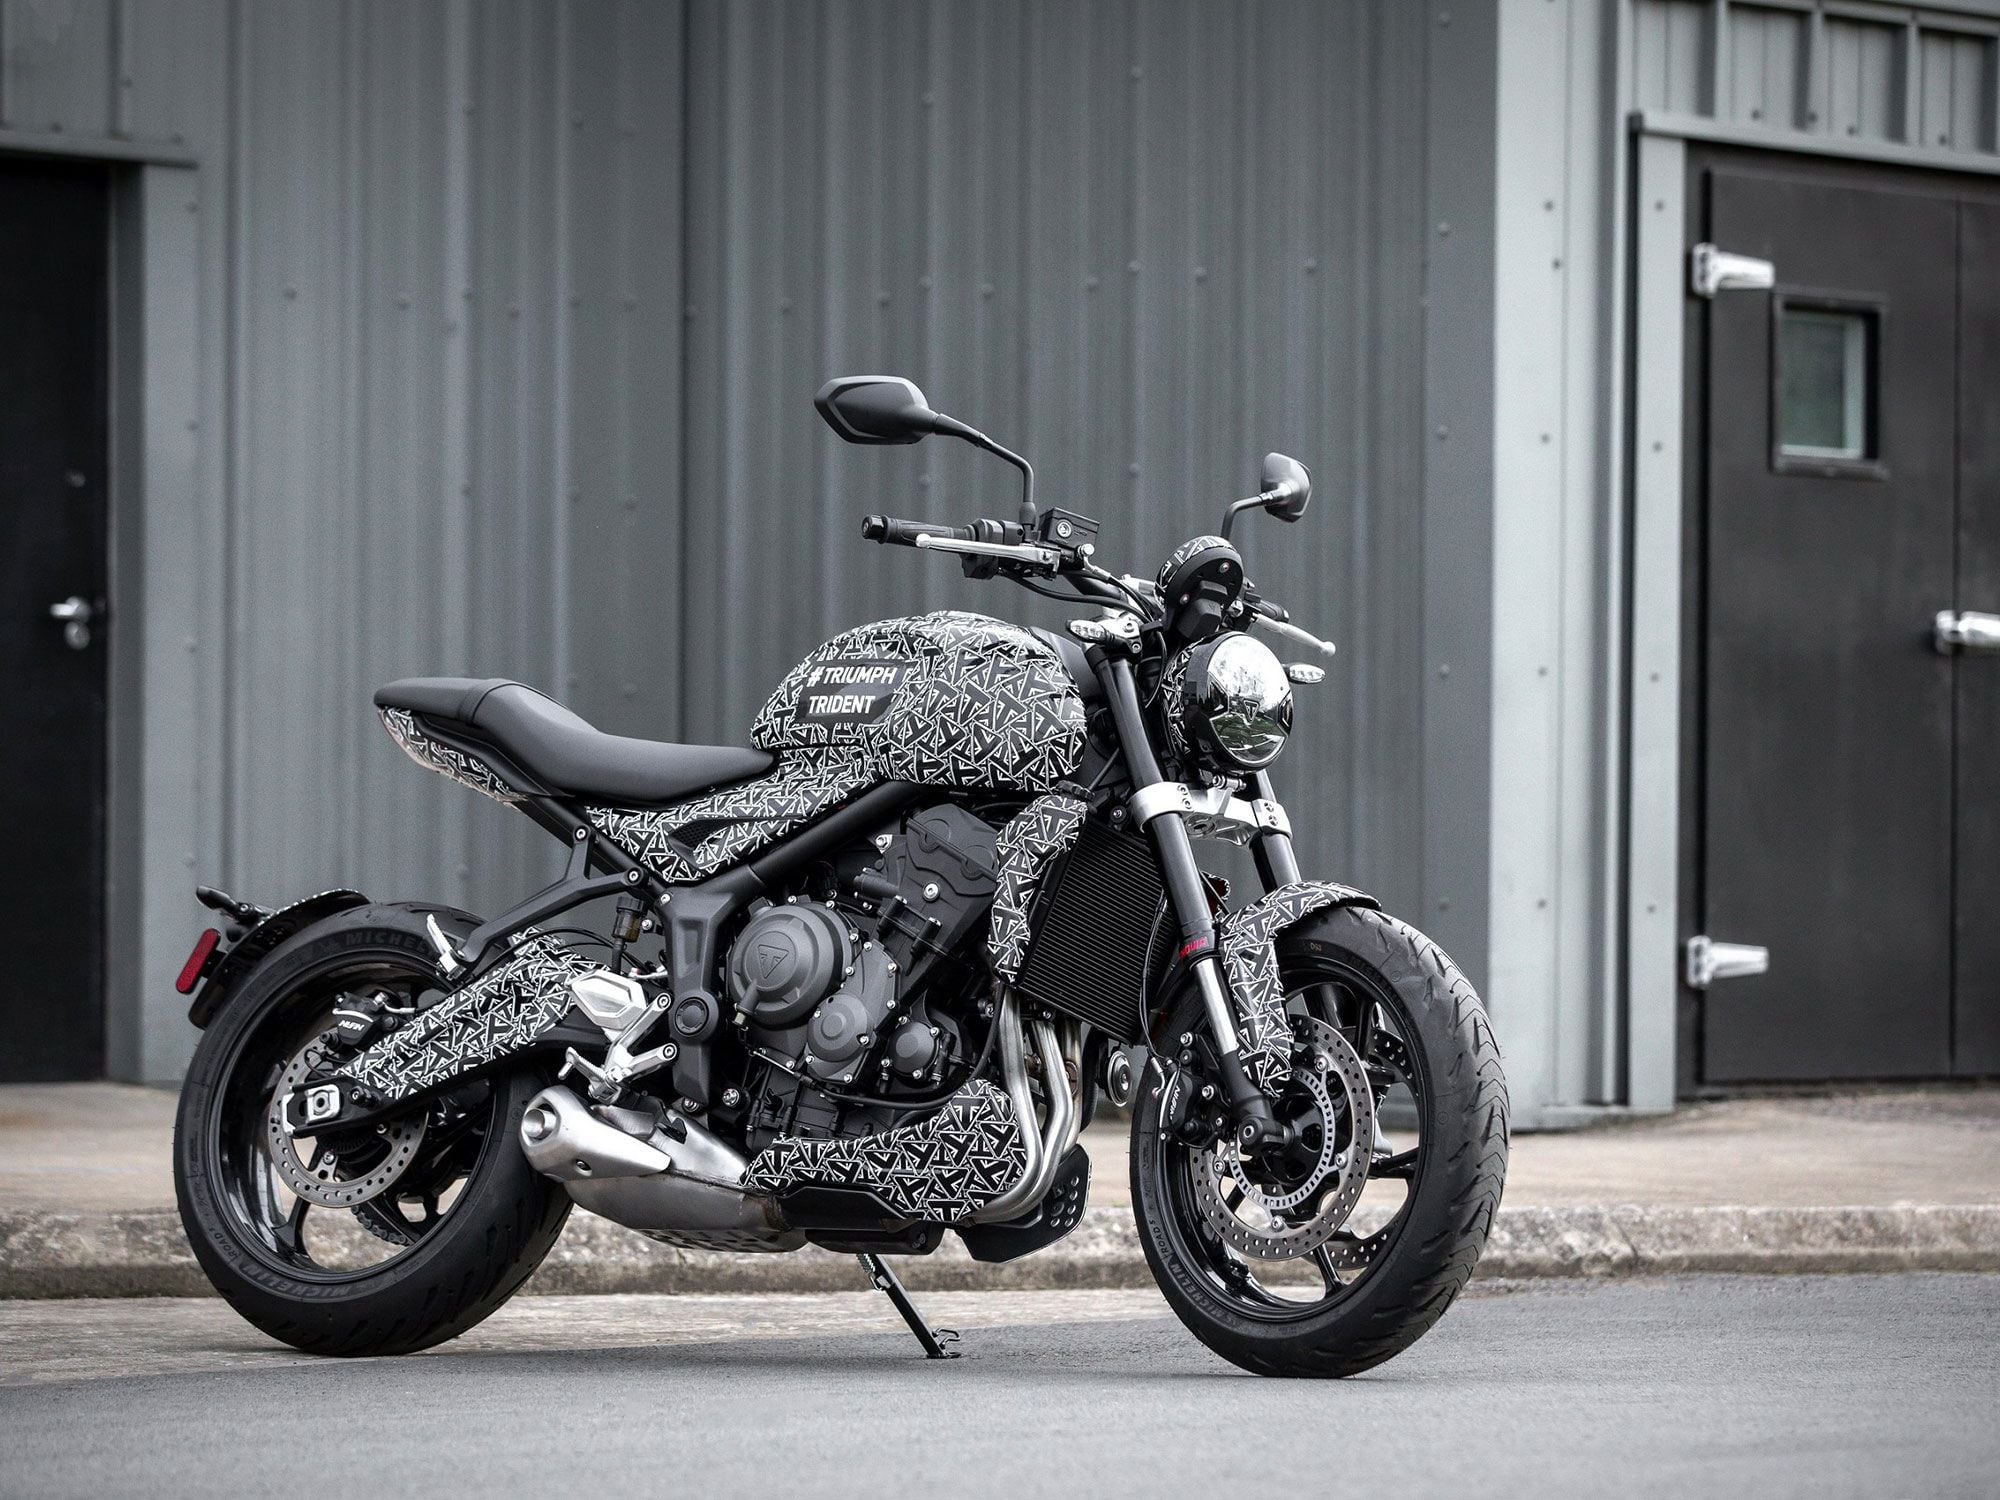 Triumph is still mum on the specs, but it looks like the Trident has a new, simpler chassis with many components borrowed from the Street Triple S.